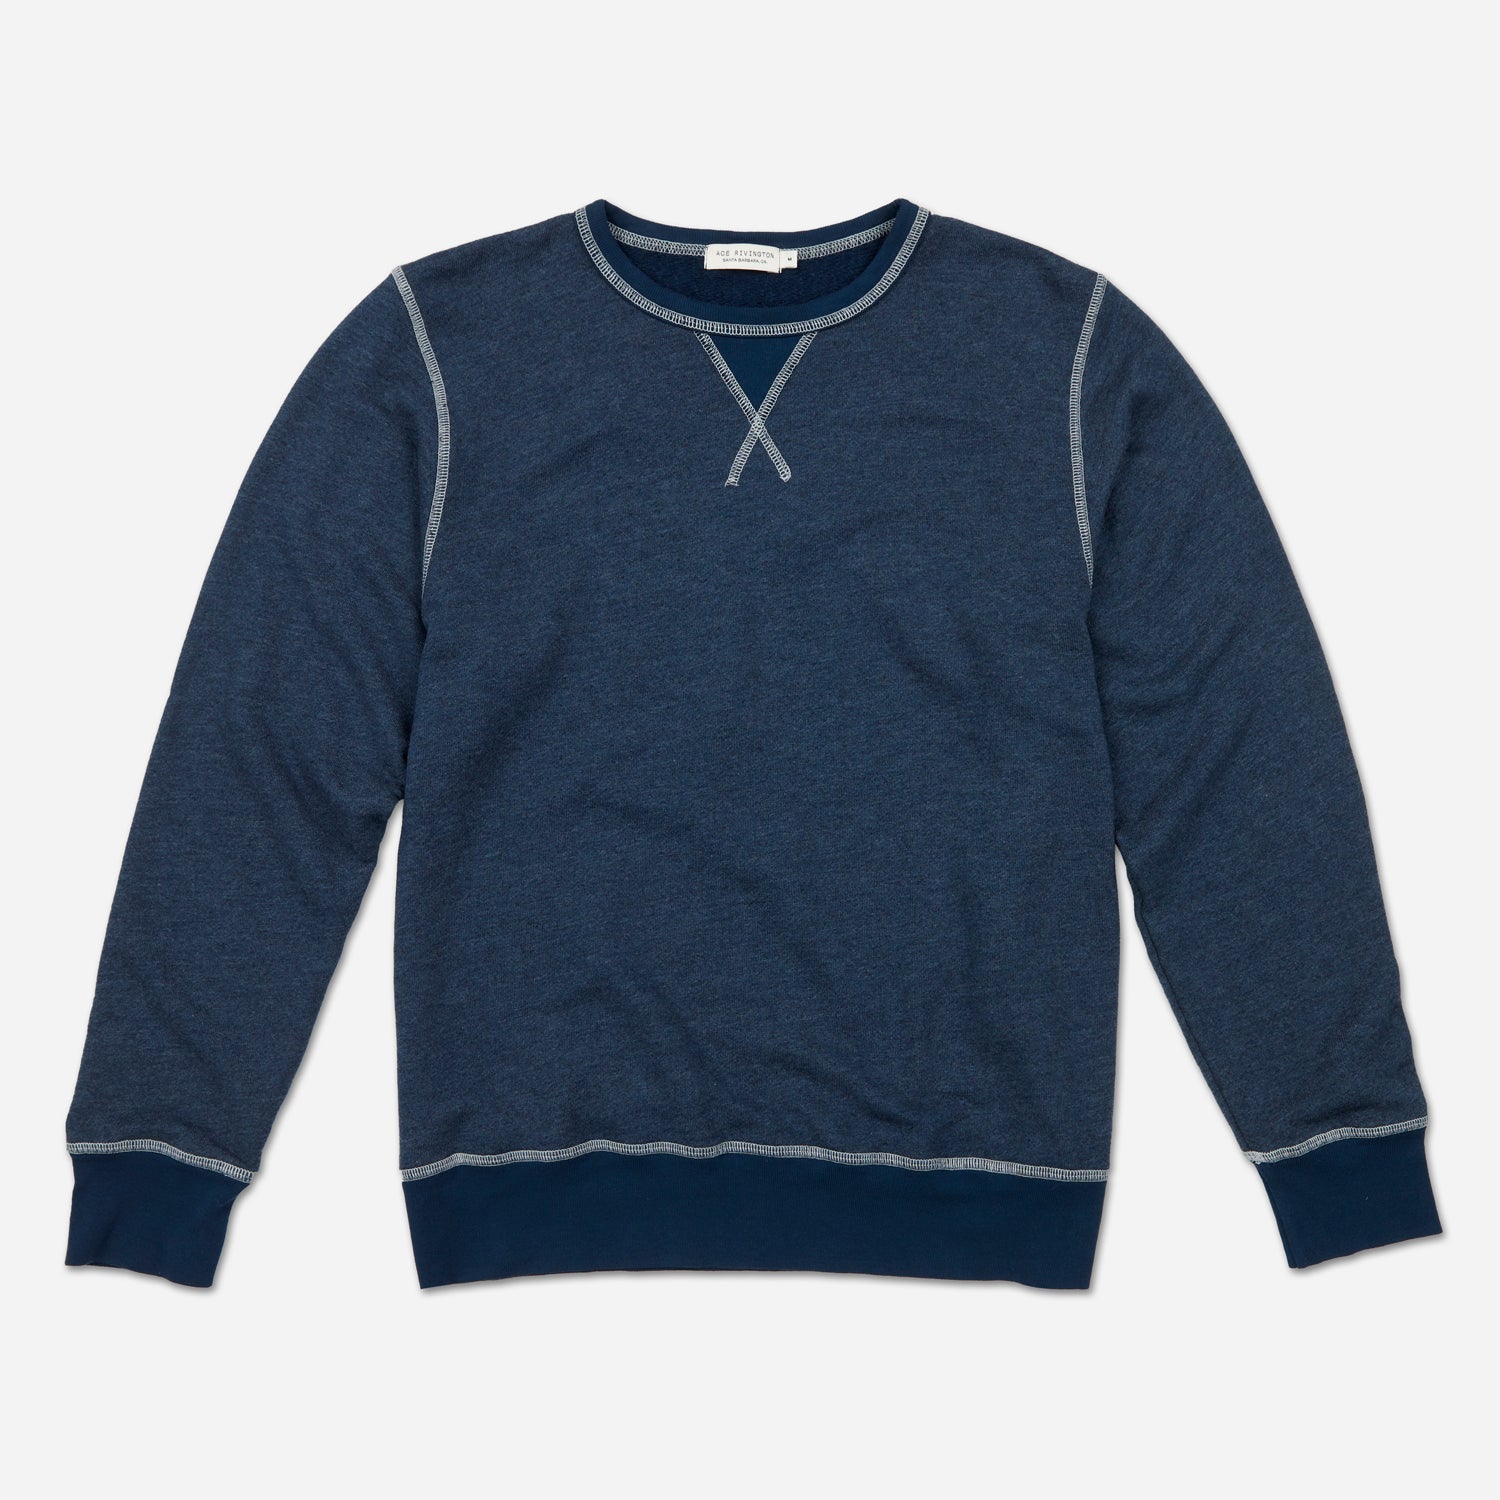 front of fully extended off navy blue homespun french terry crew neck sweatshirt with white accent stitching